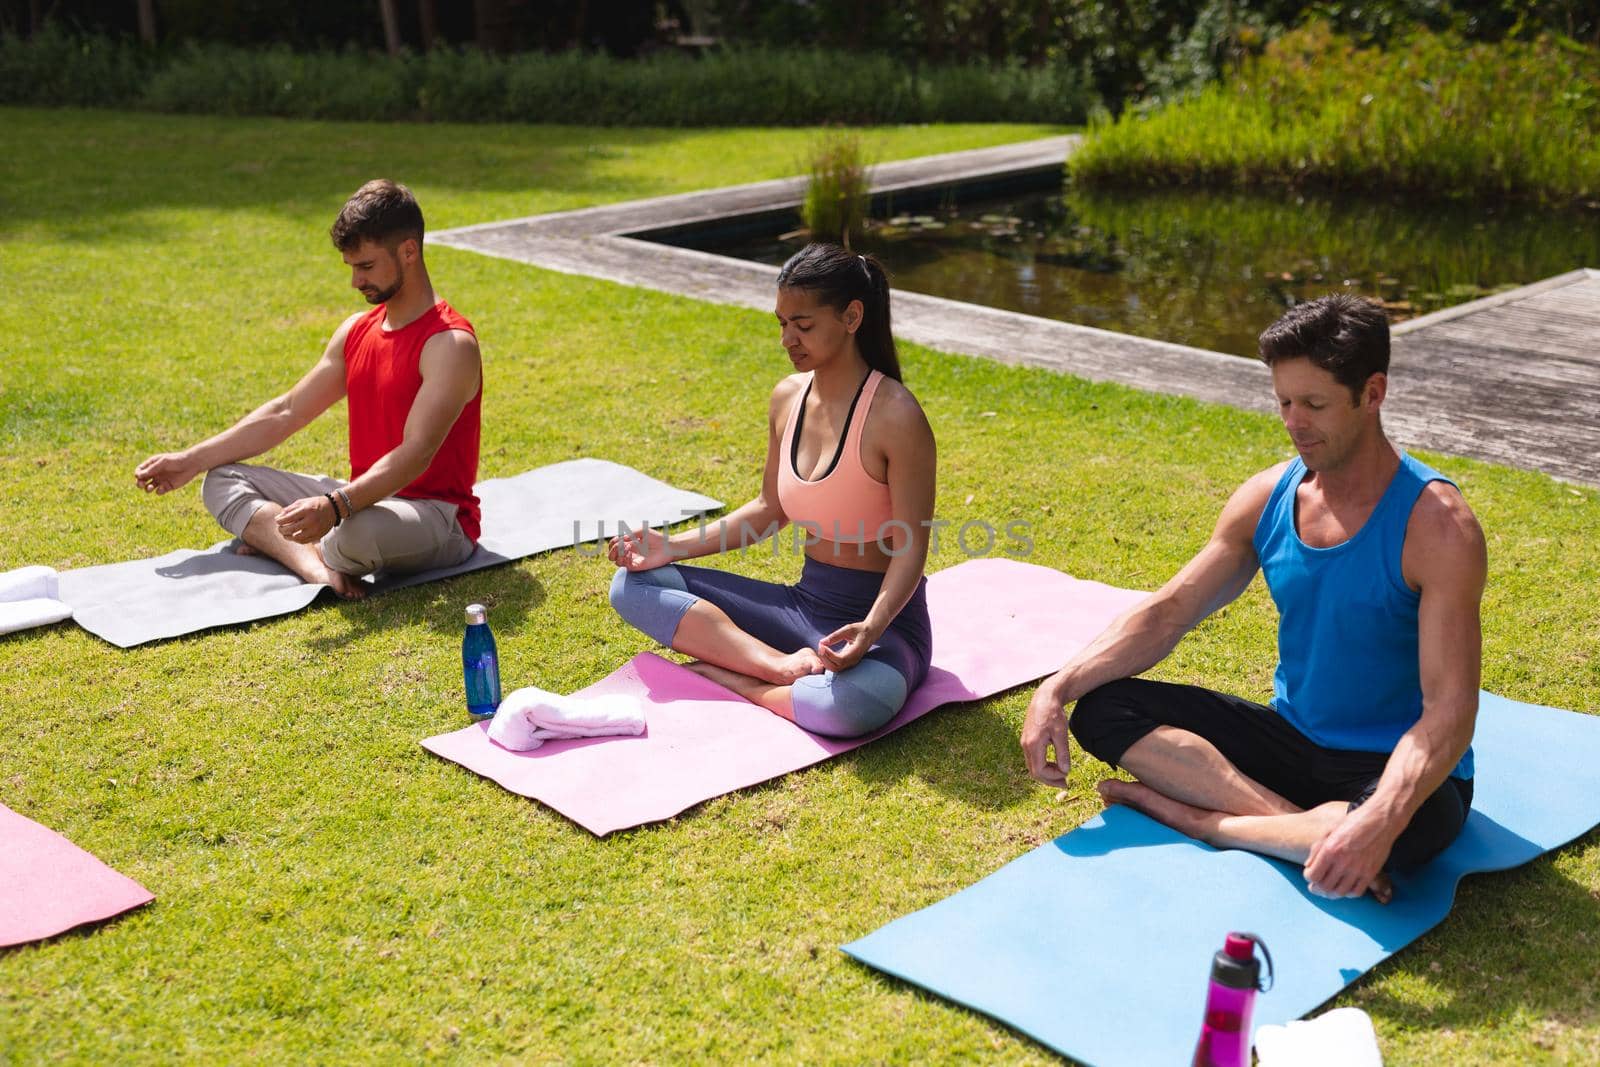 Men and woman in sportswear meditating on exercise mats in park by Wavebreakmedia